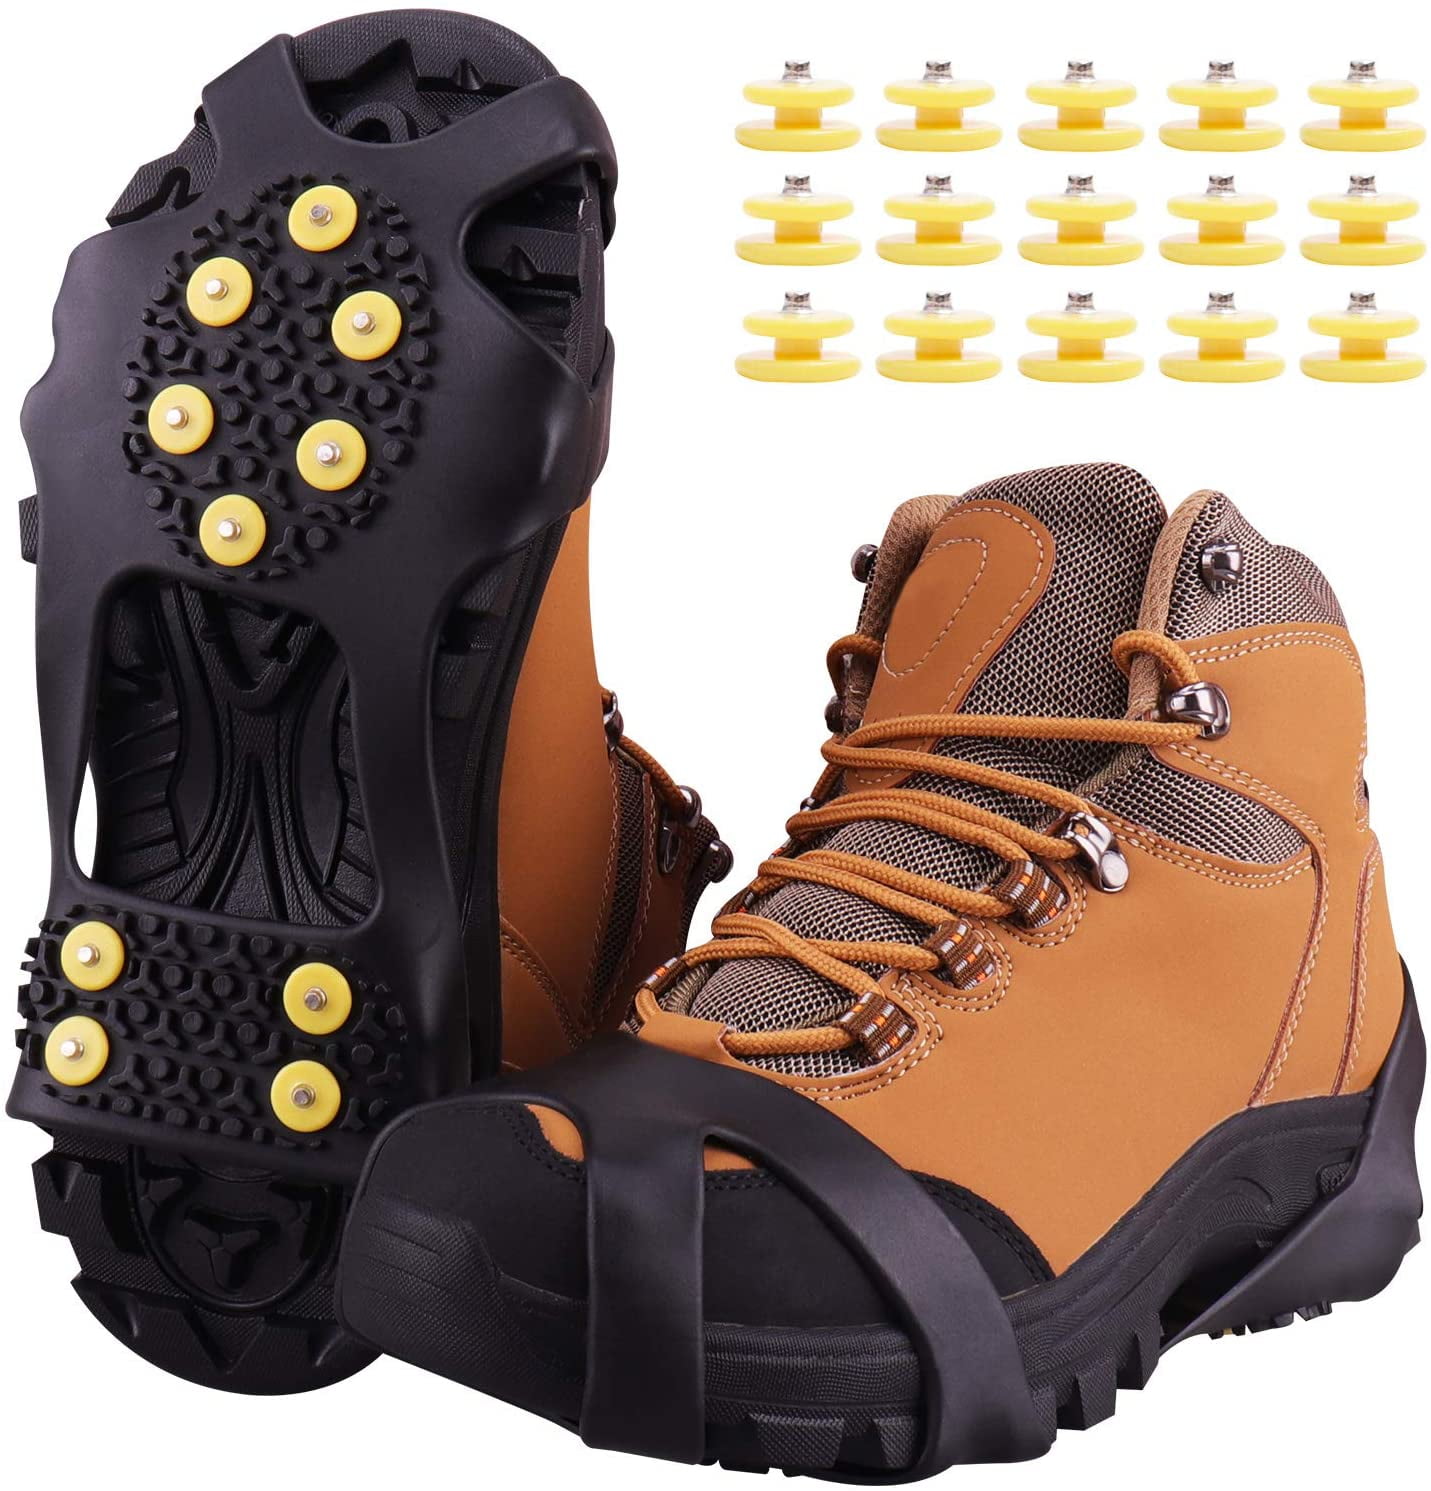 Ice Snow Grips Anti Slip Winter Ice Grippers Snow Traction Cleats Crampon Spikers Ice Traction Slip on Boots Shoes Cover Fit for Hiking Fishing Climbing With 15-Pack Spare Snow Spikes 